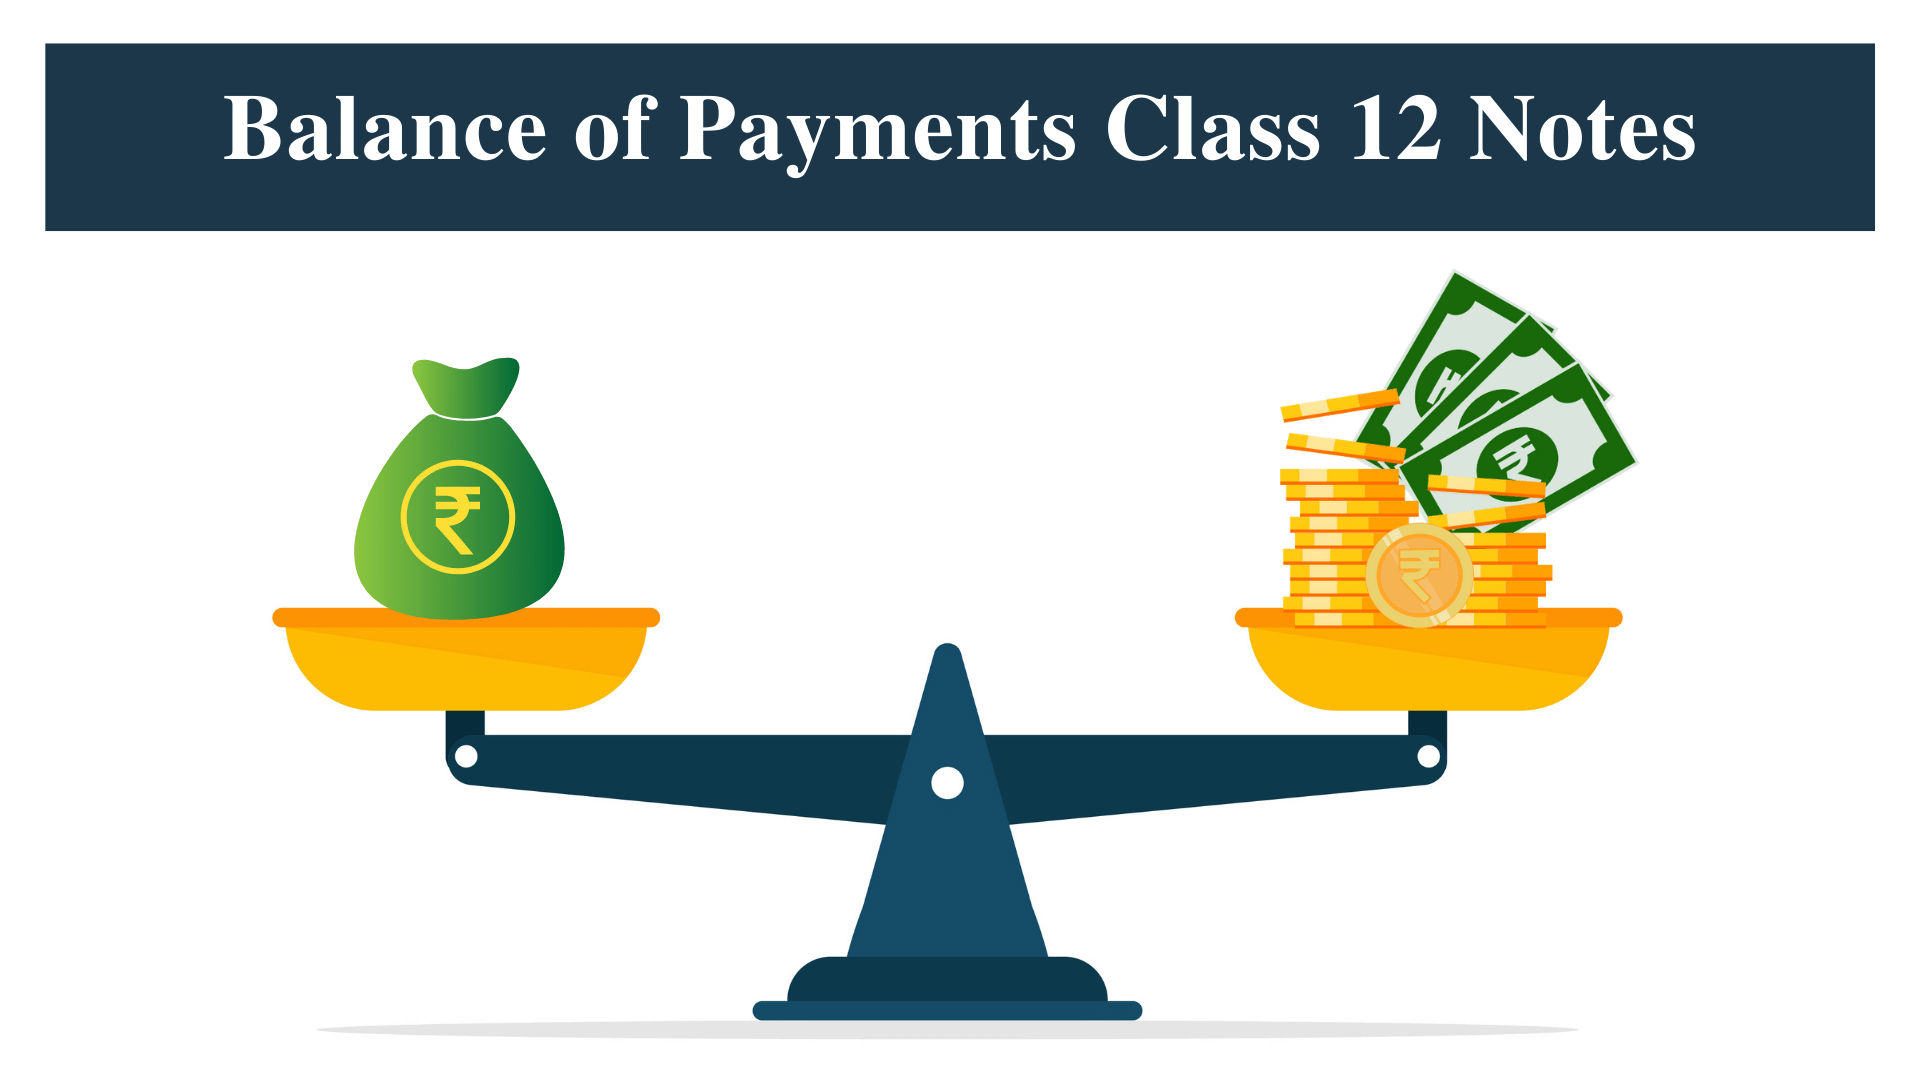 Balance of Payments Class 12 Notes